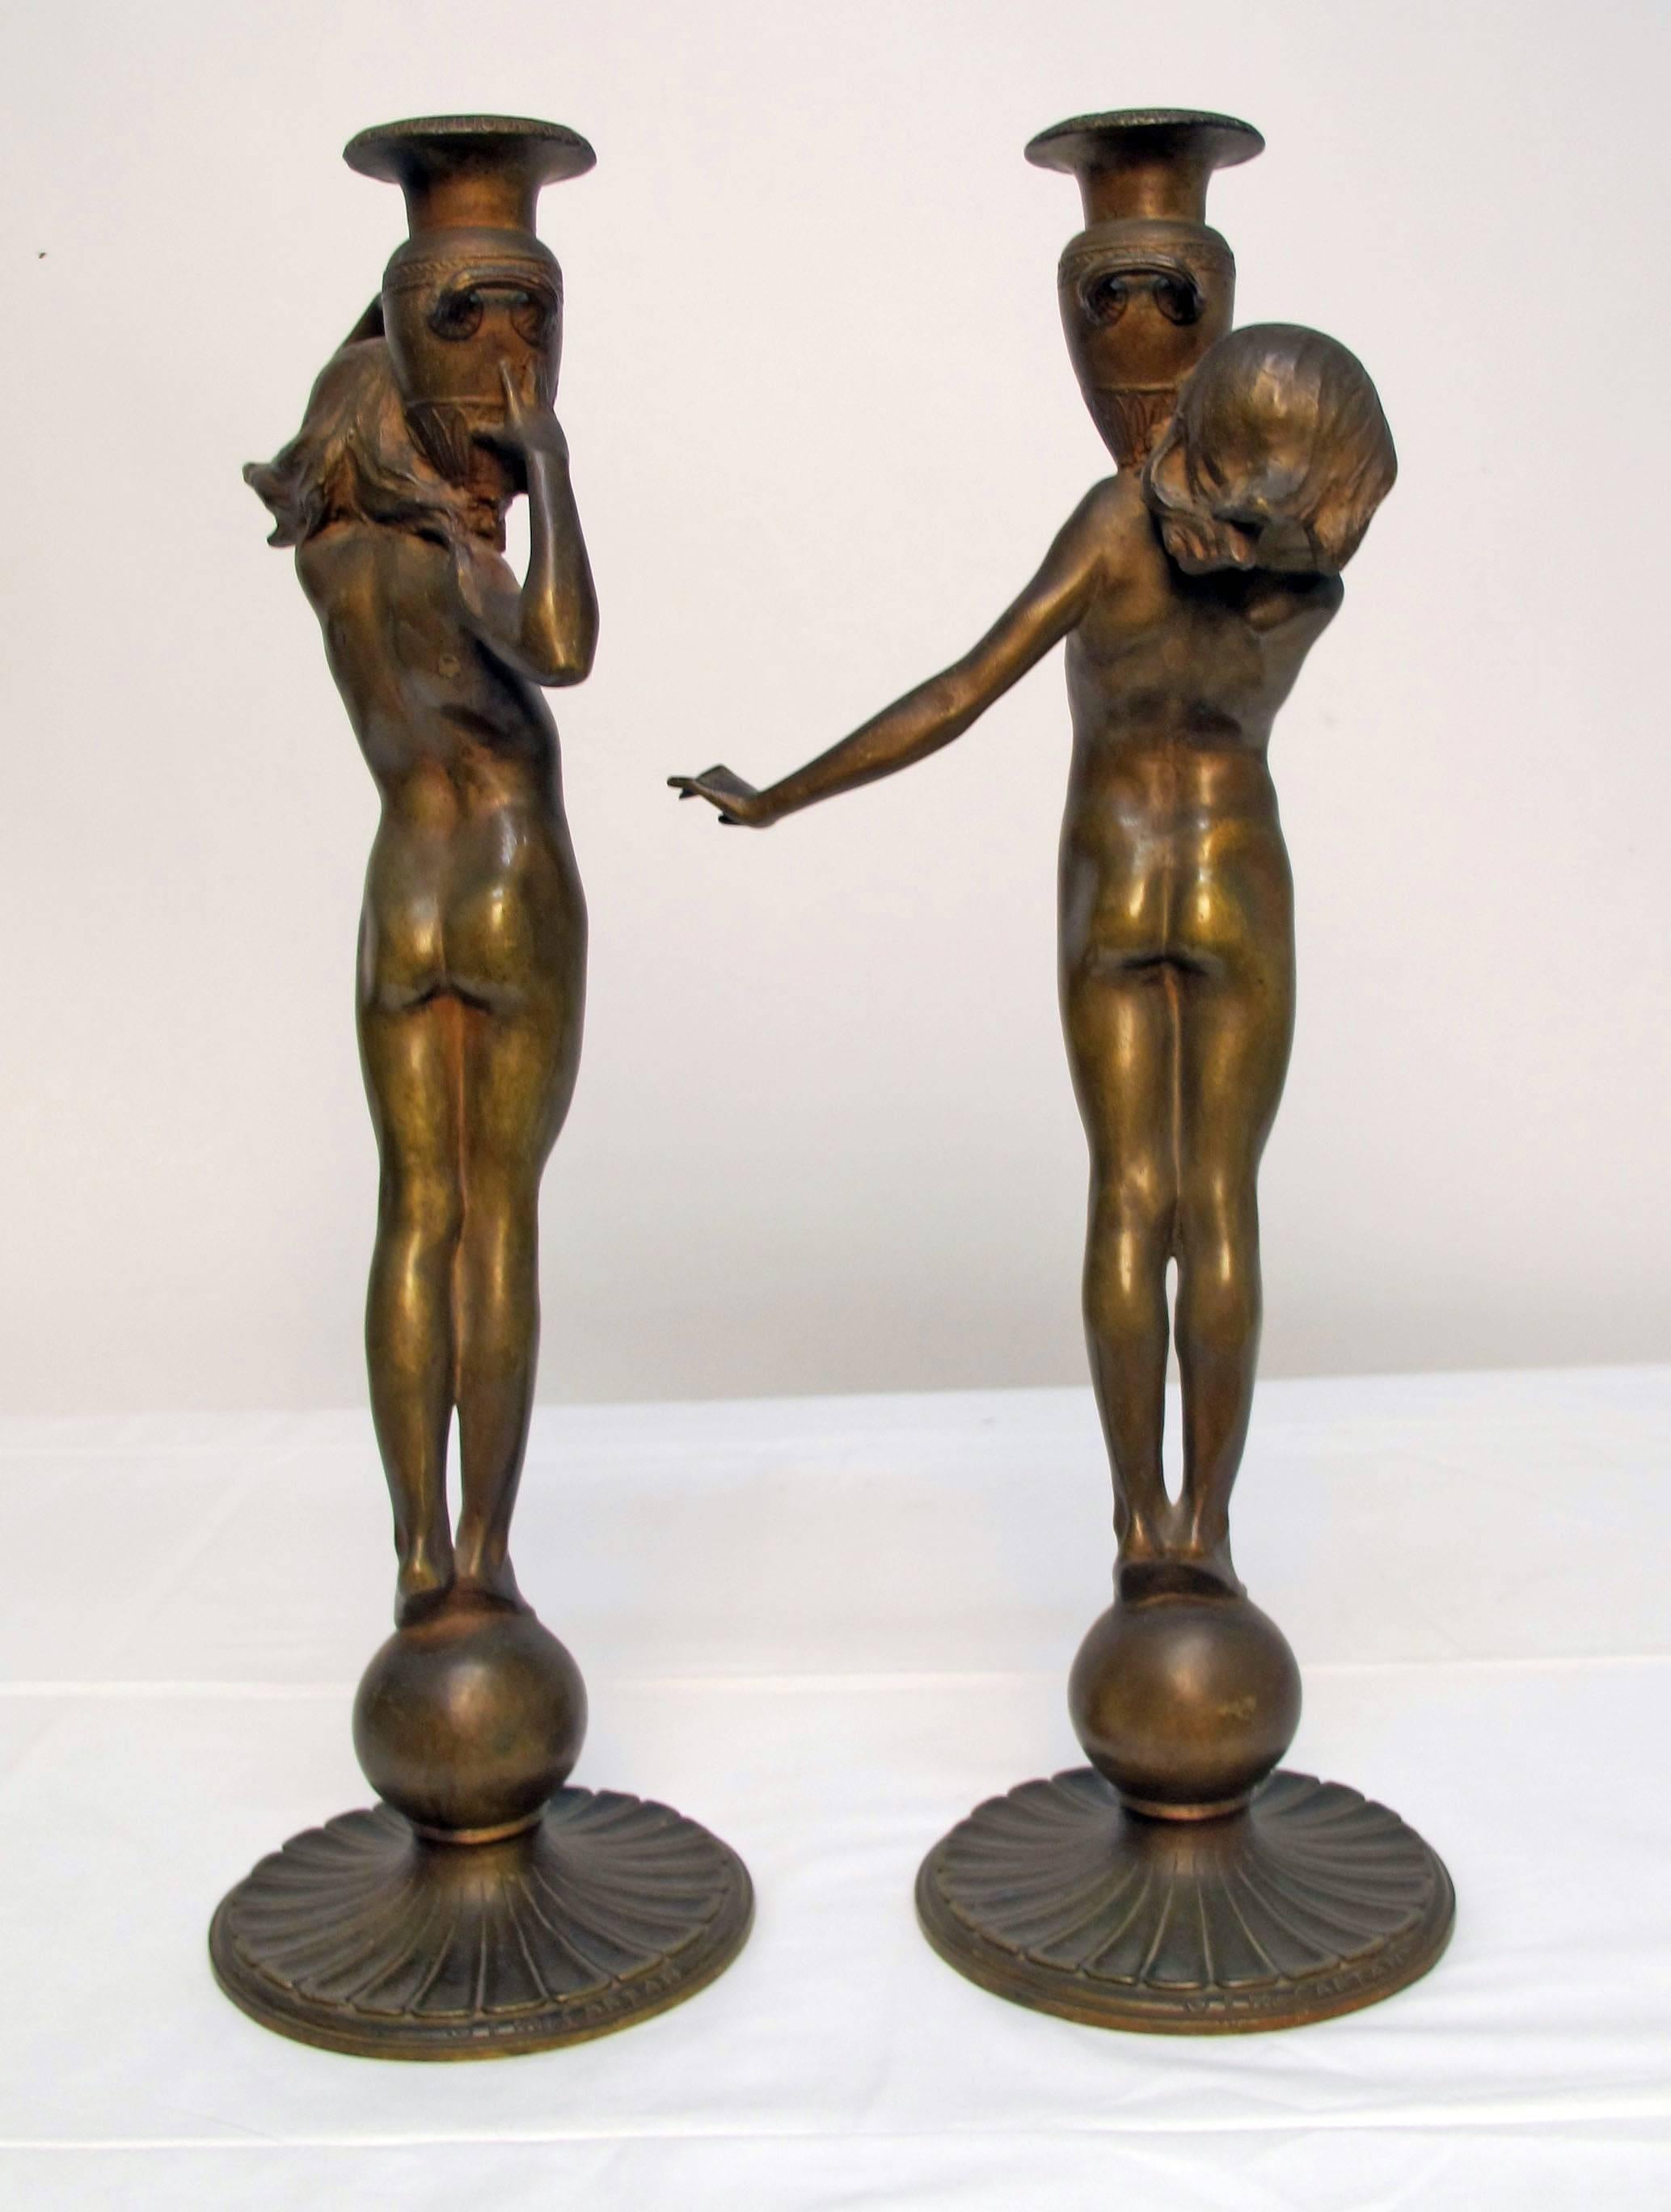 A pair of Art Nouveau period bronze bookends, signed E. McCartan (b.1879-1947), American, late 19th to early 20th century.
Edward Francis McCartan was active/lived in New York. He is known for sculptor-allegorical figure, monument.